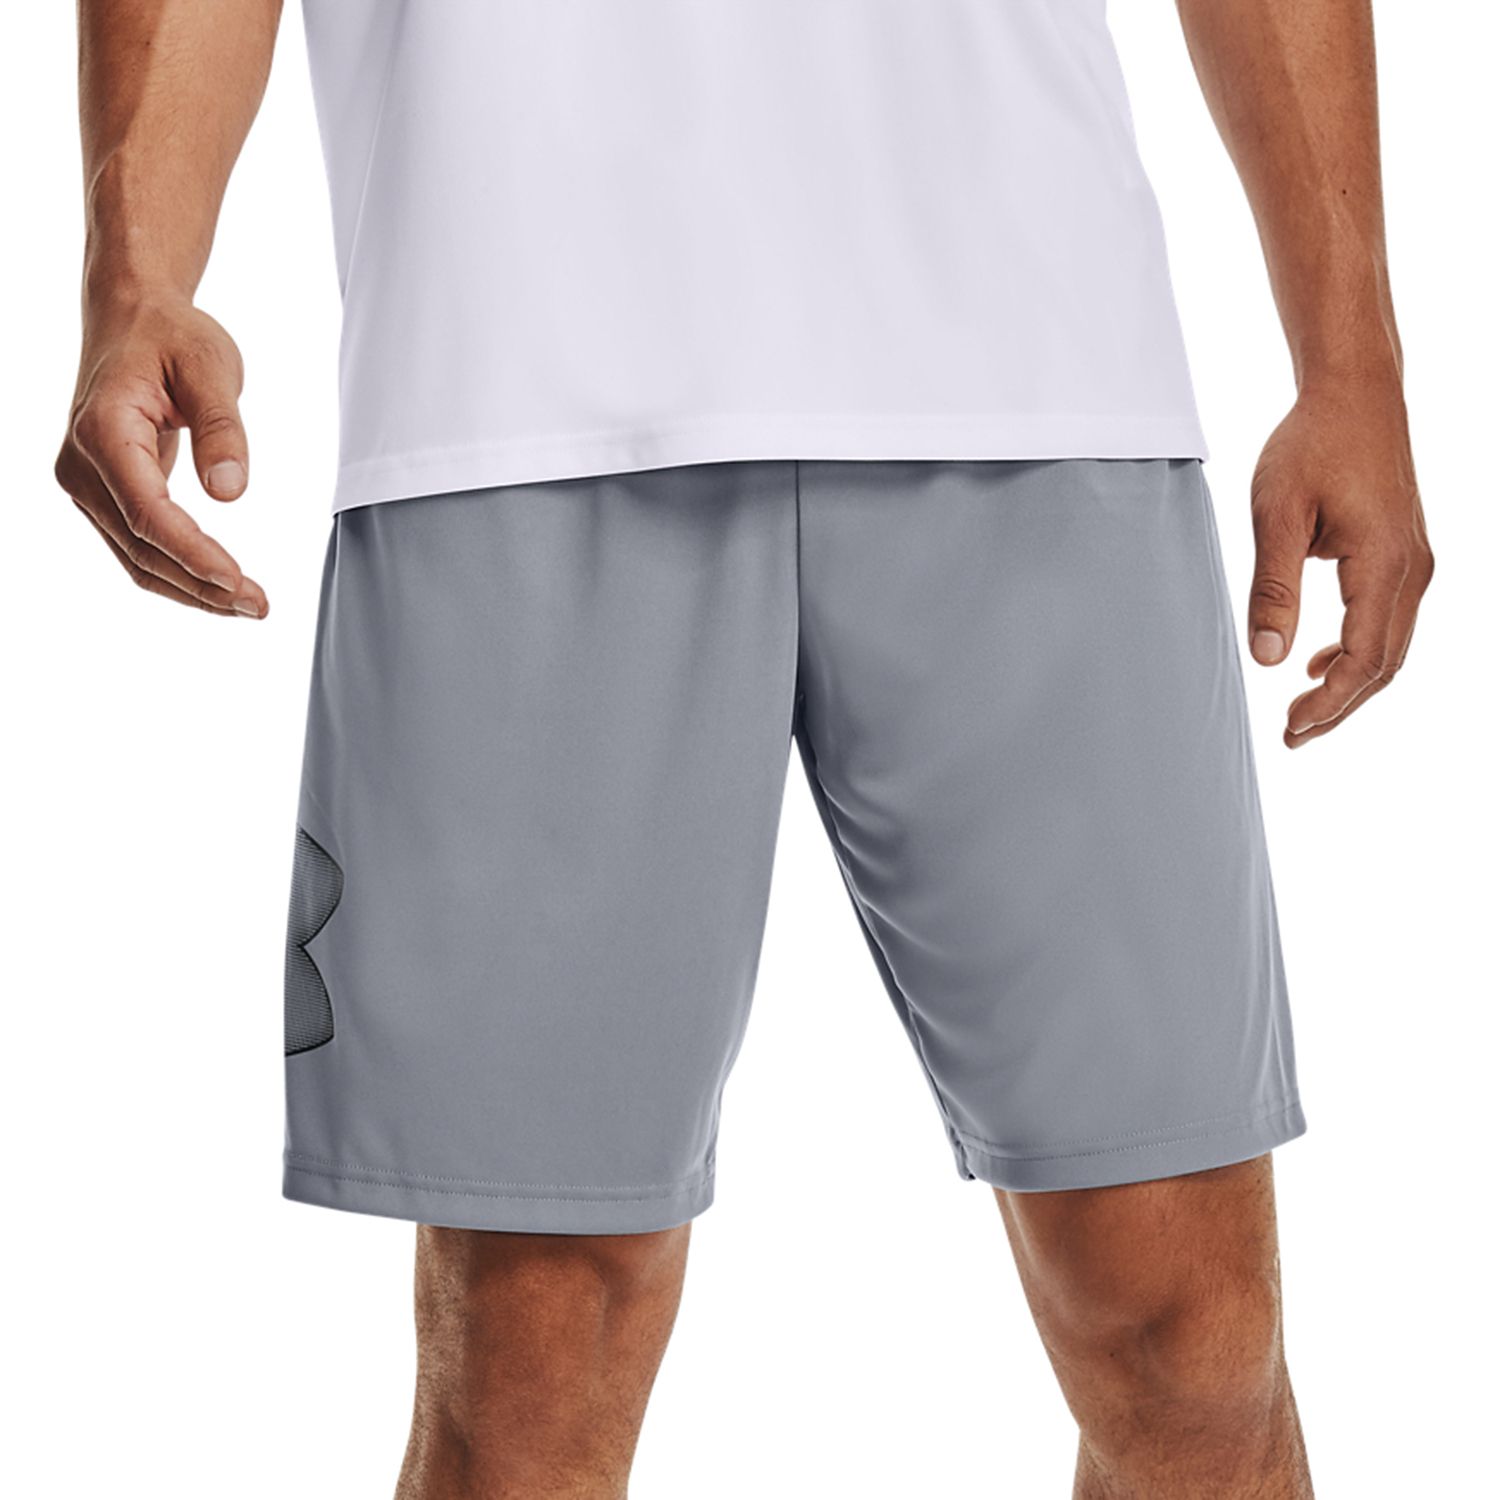 under armor loose shorts